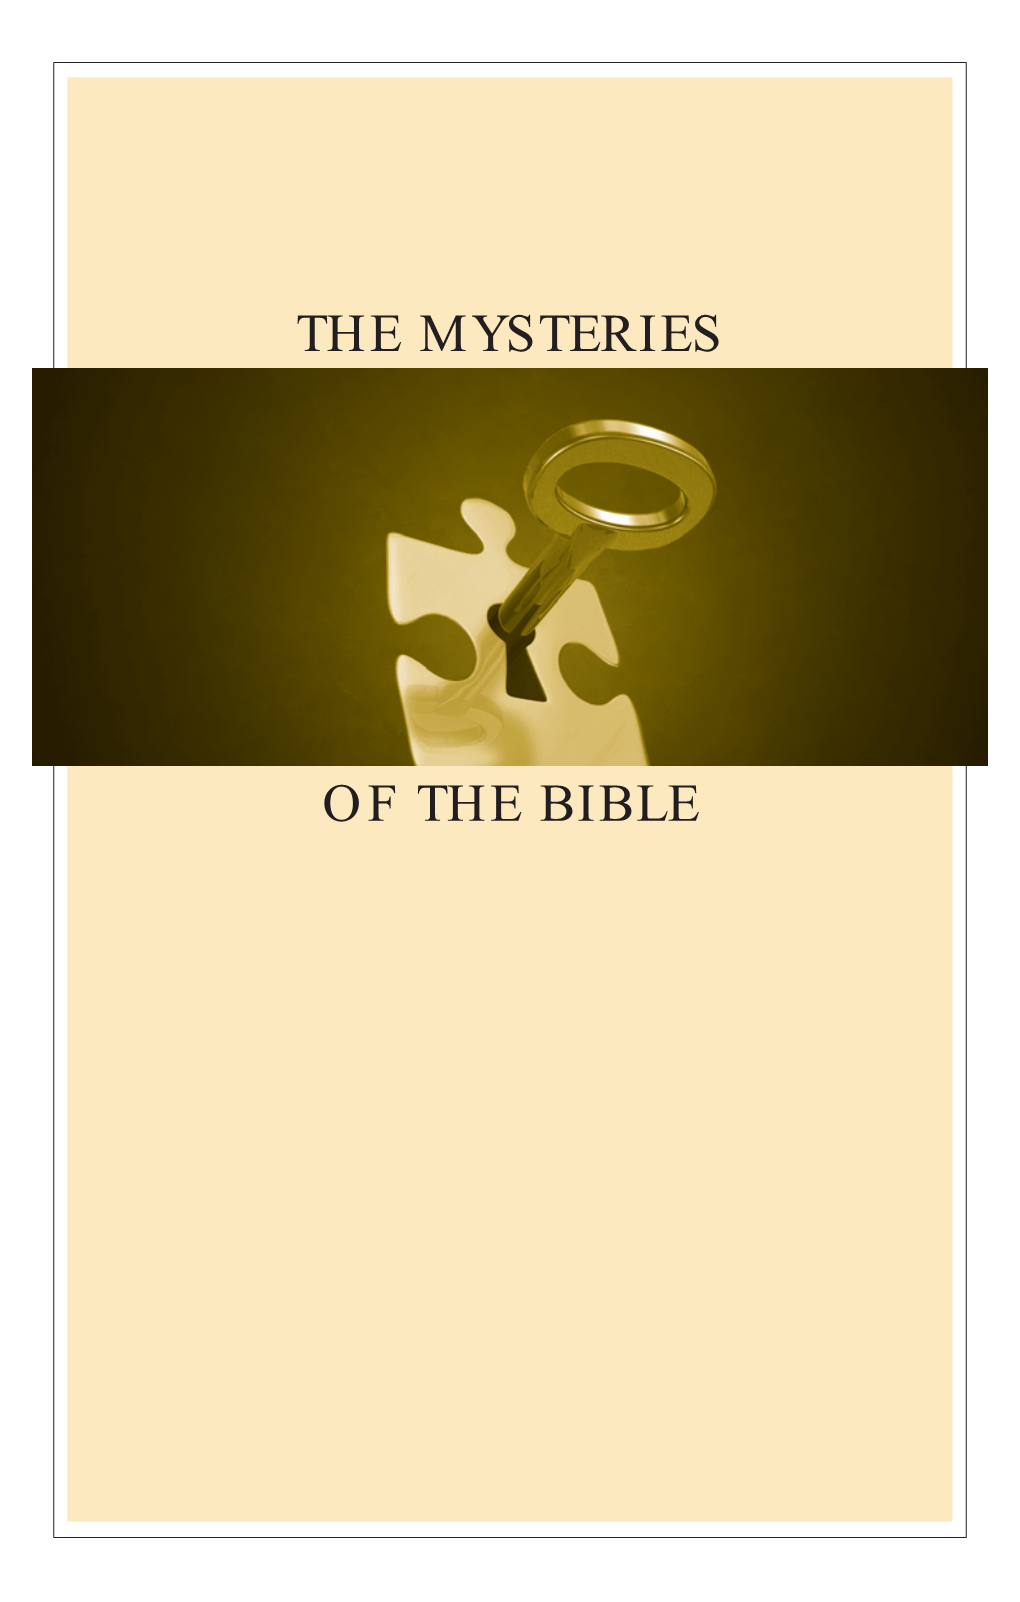 The Mysteries of the Bible